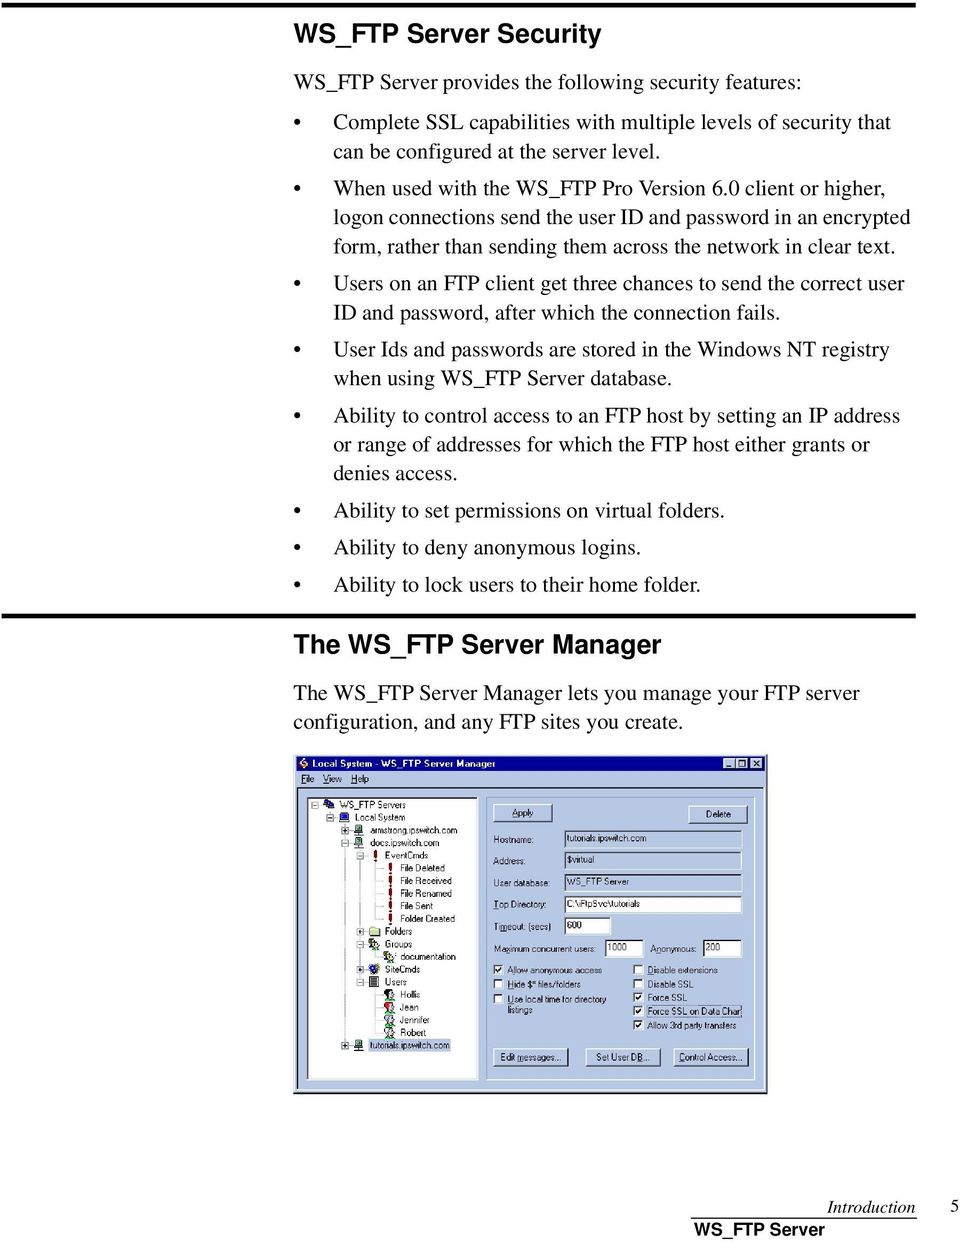 Users on an FTP client get three chances to send the correct user ID and password, after which the connection fails. User Ids and passwords are stored in the Windows NT registry when using database.